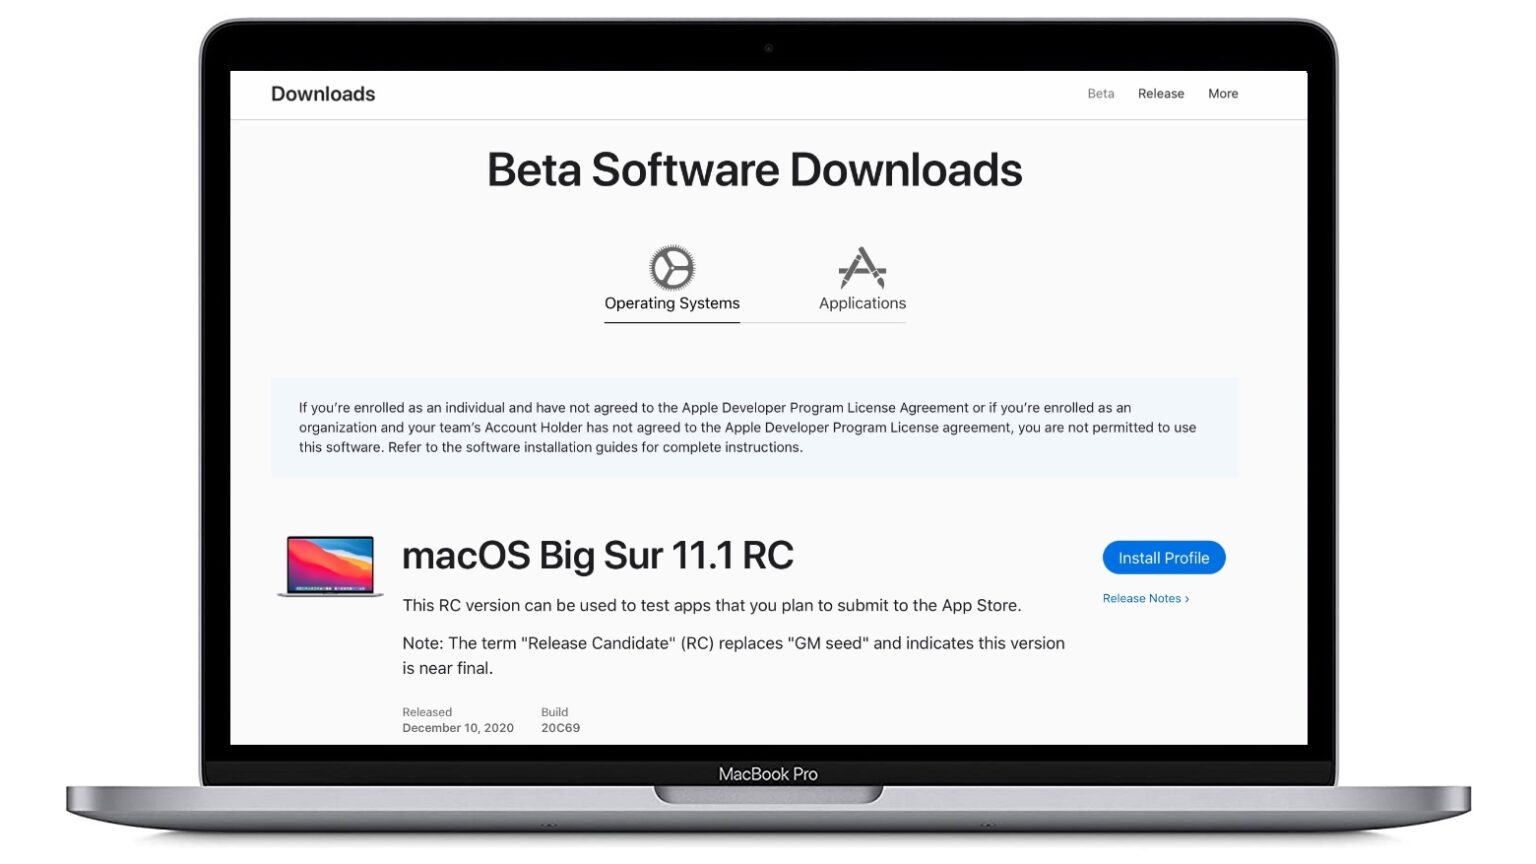 macOS Big Sur 11.1 Release Candidate is what Apple used to call a ‘Golden Master.’